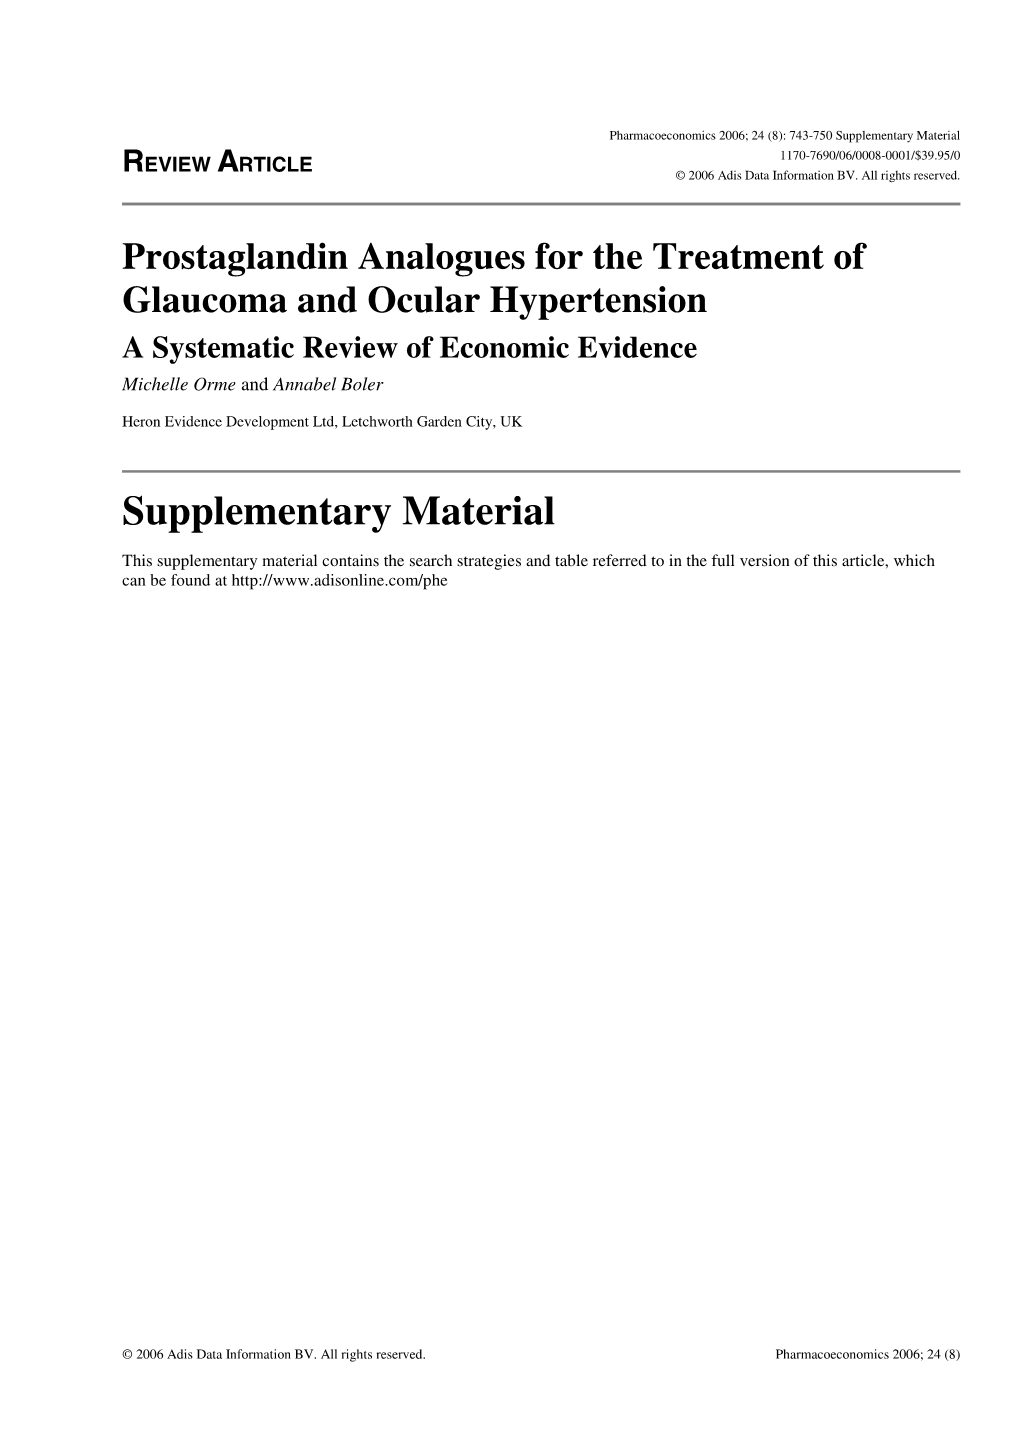 Prostaglandin Analogues for the Treatment of Glaucoma and Ocular Hypertension a Systematic Review of Economic Evidence Michelle Orme and Annabel Boler